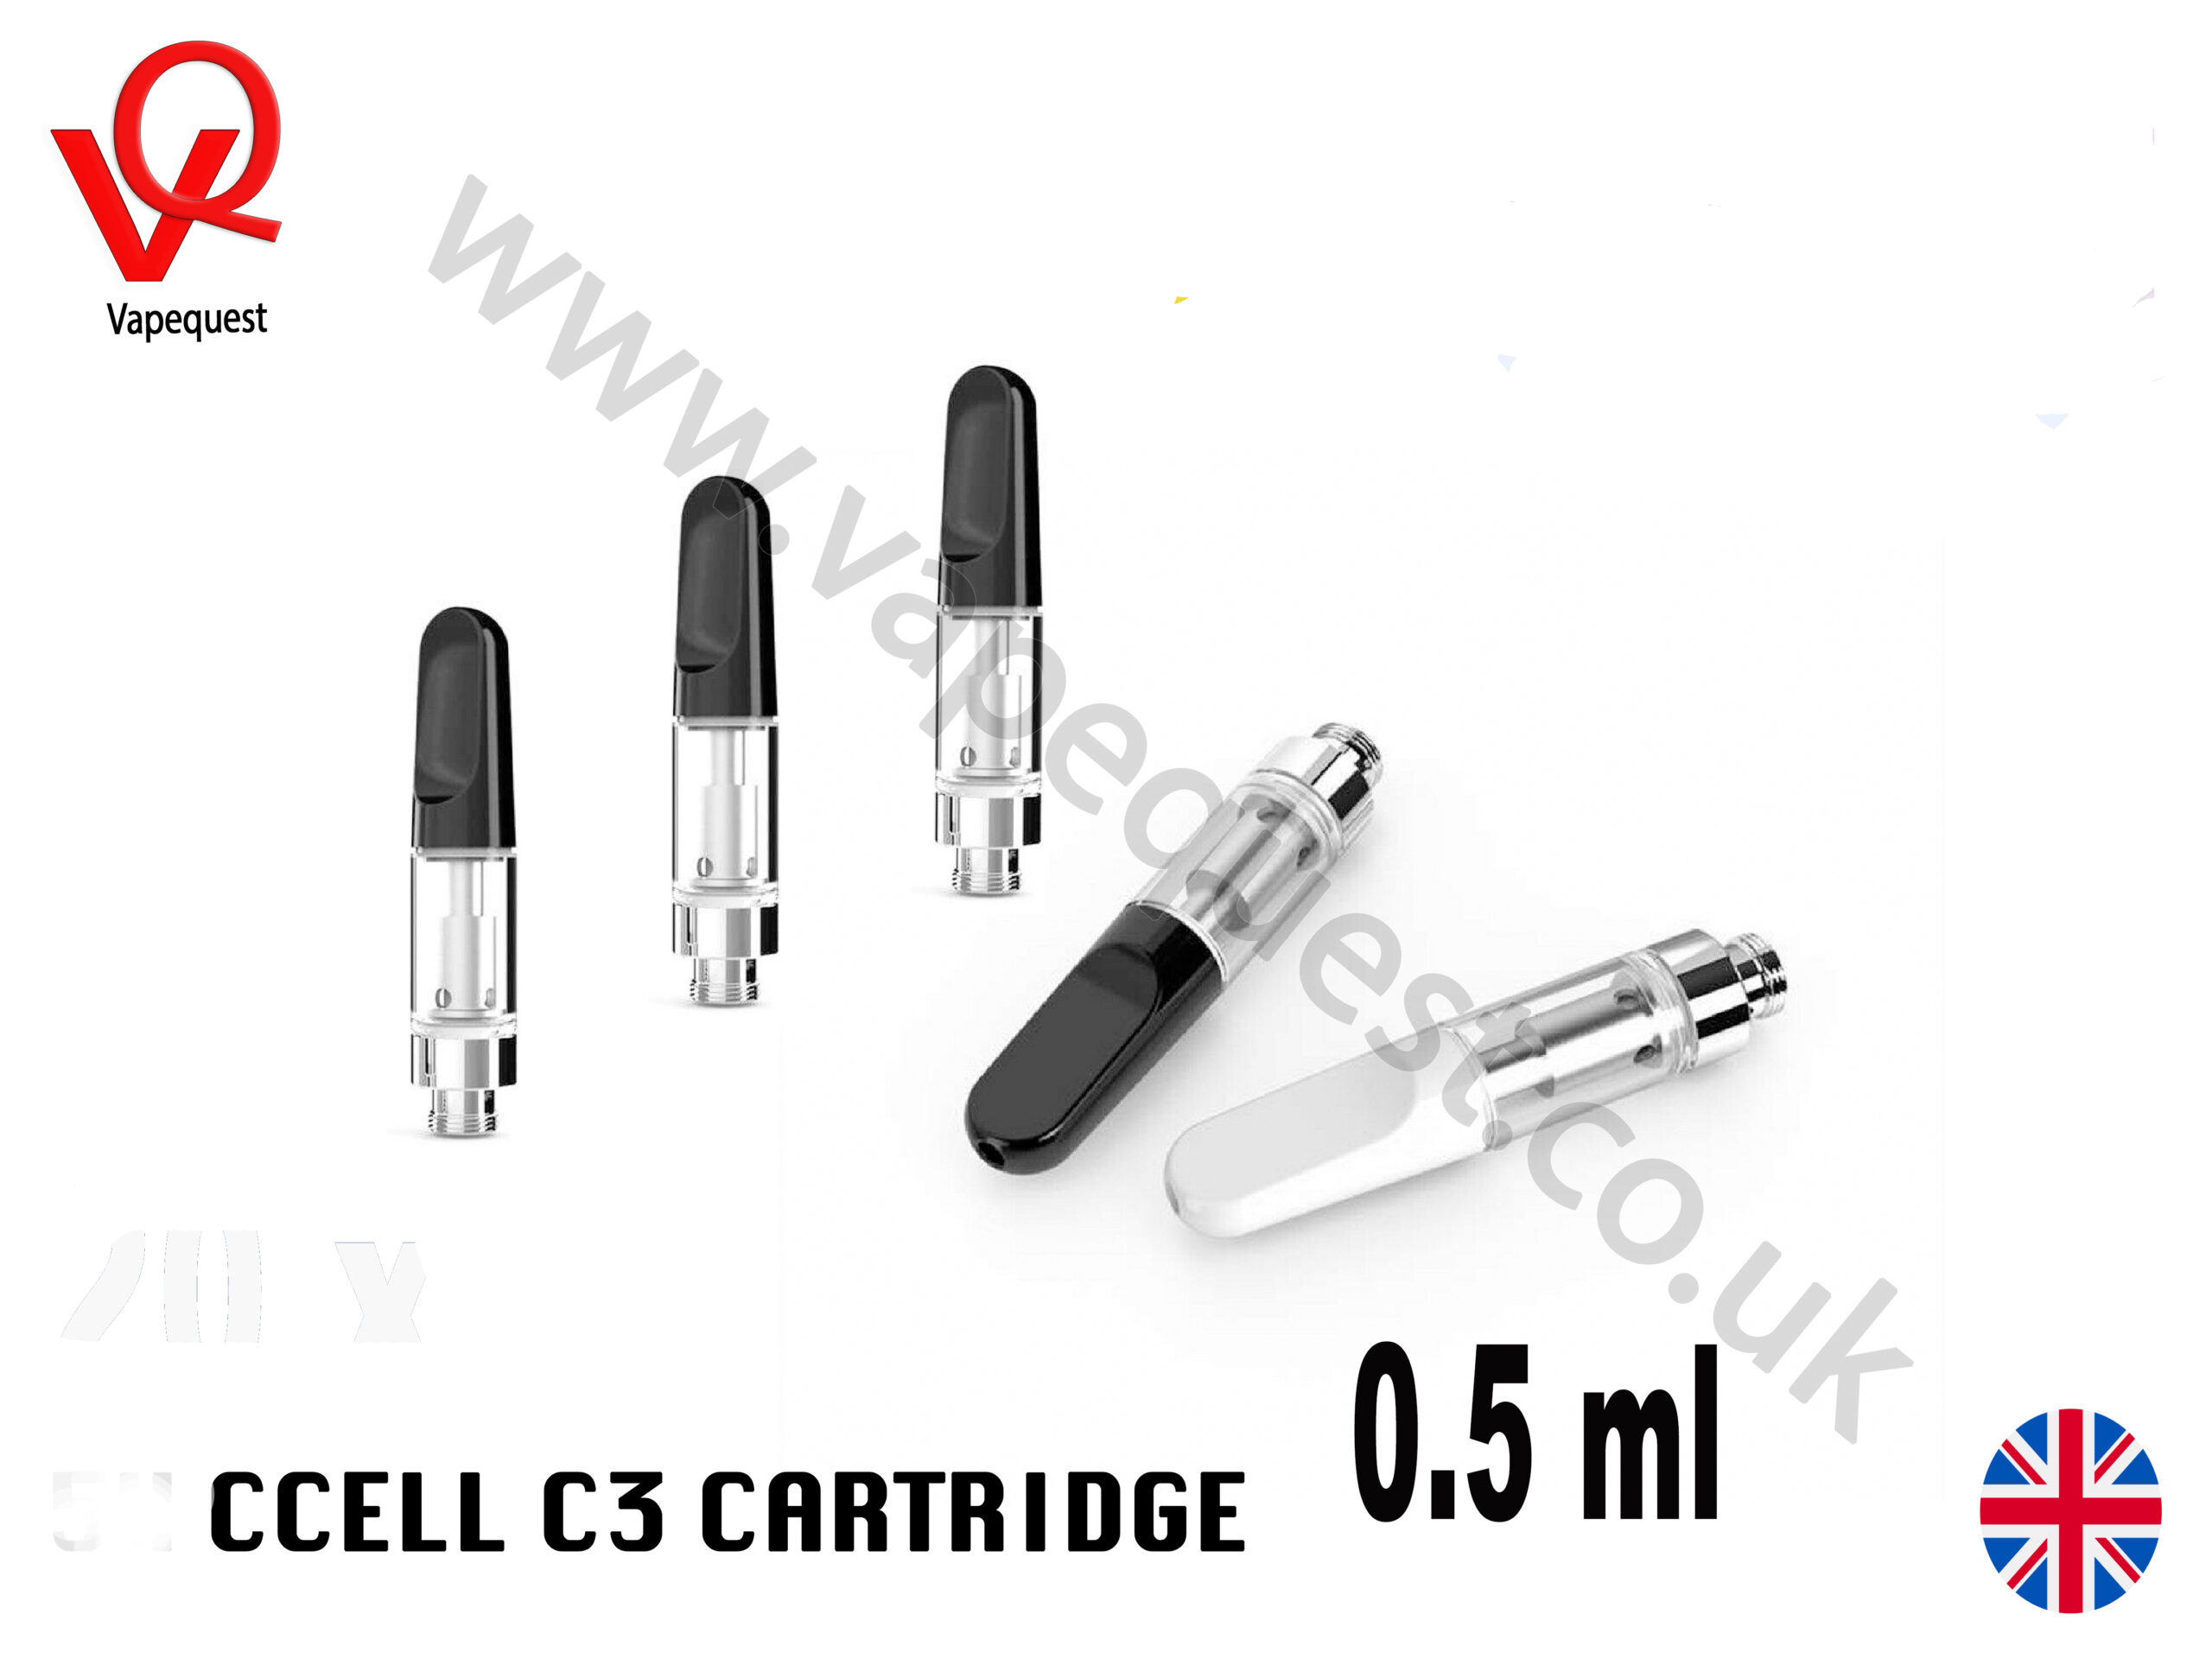 This a image of Vapequest UK very own CCELL C3 Cartridge 0.5ml